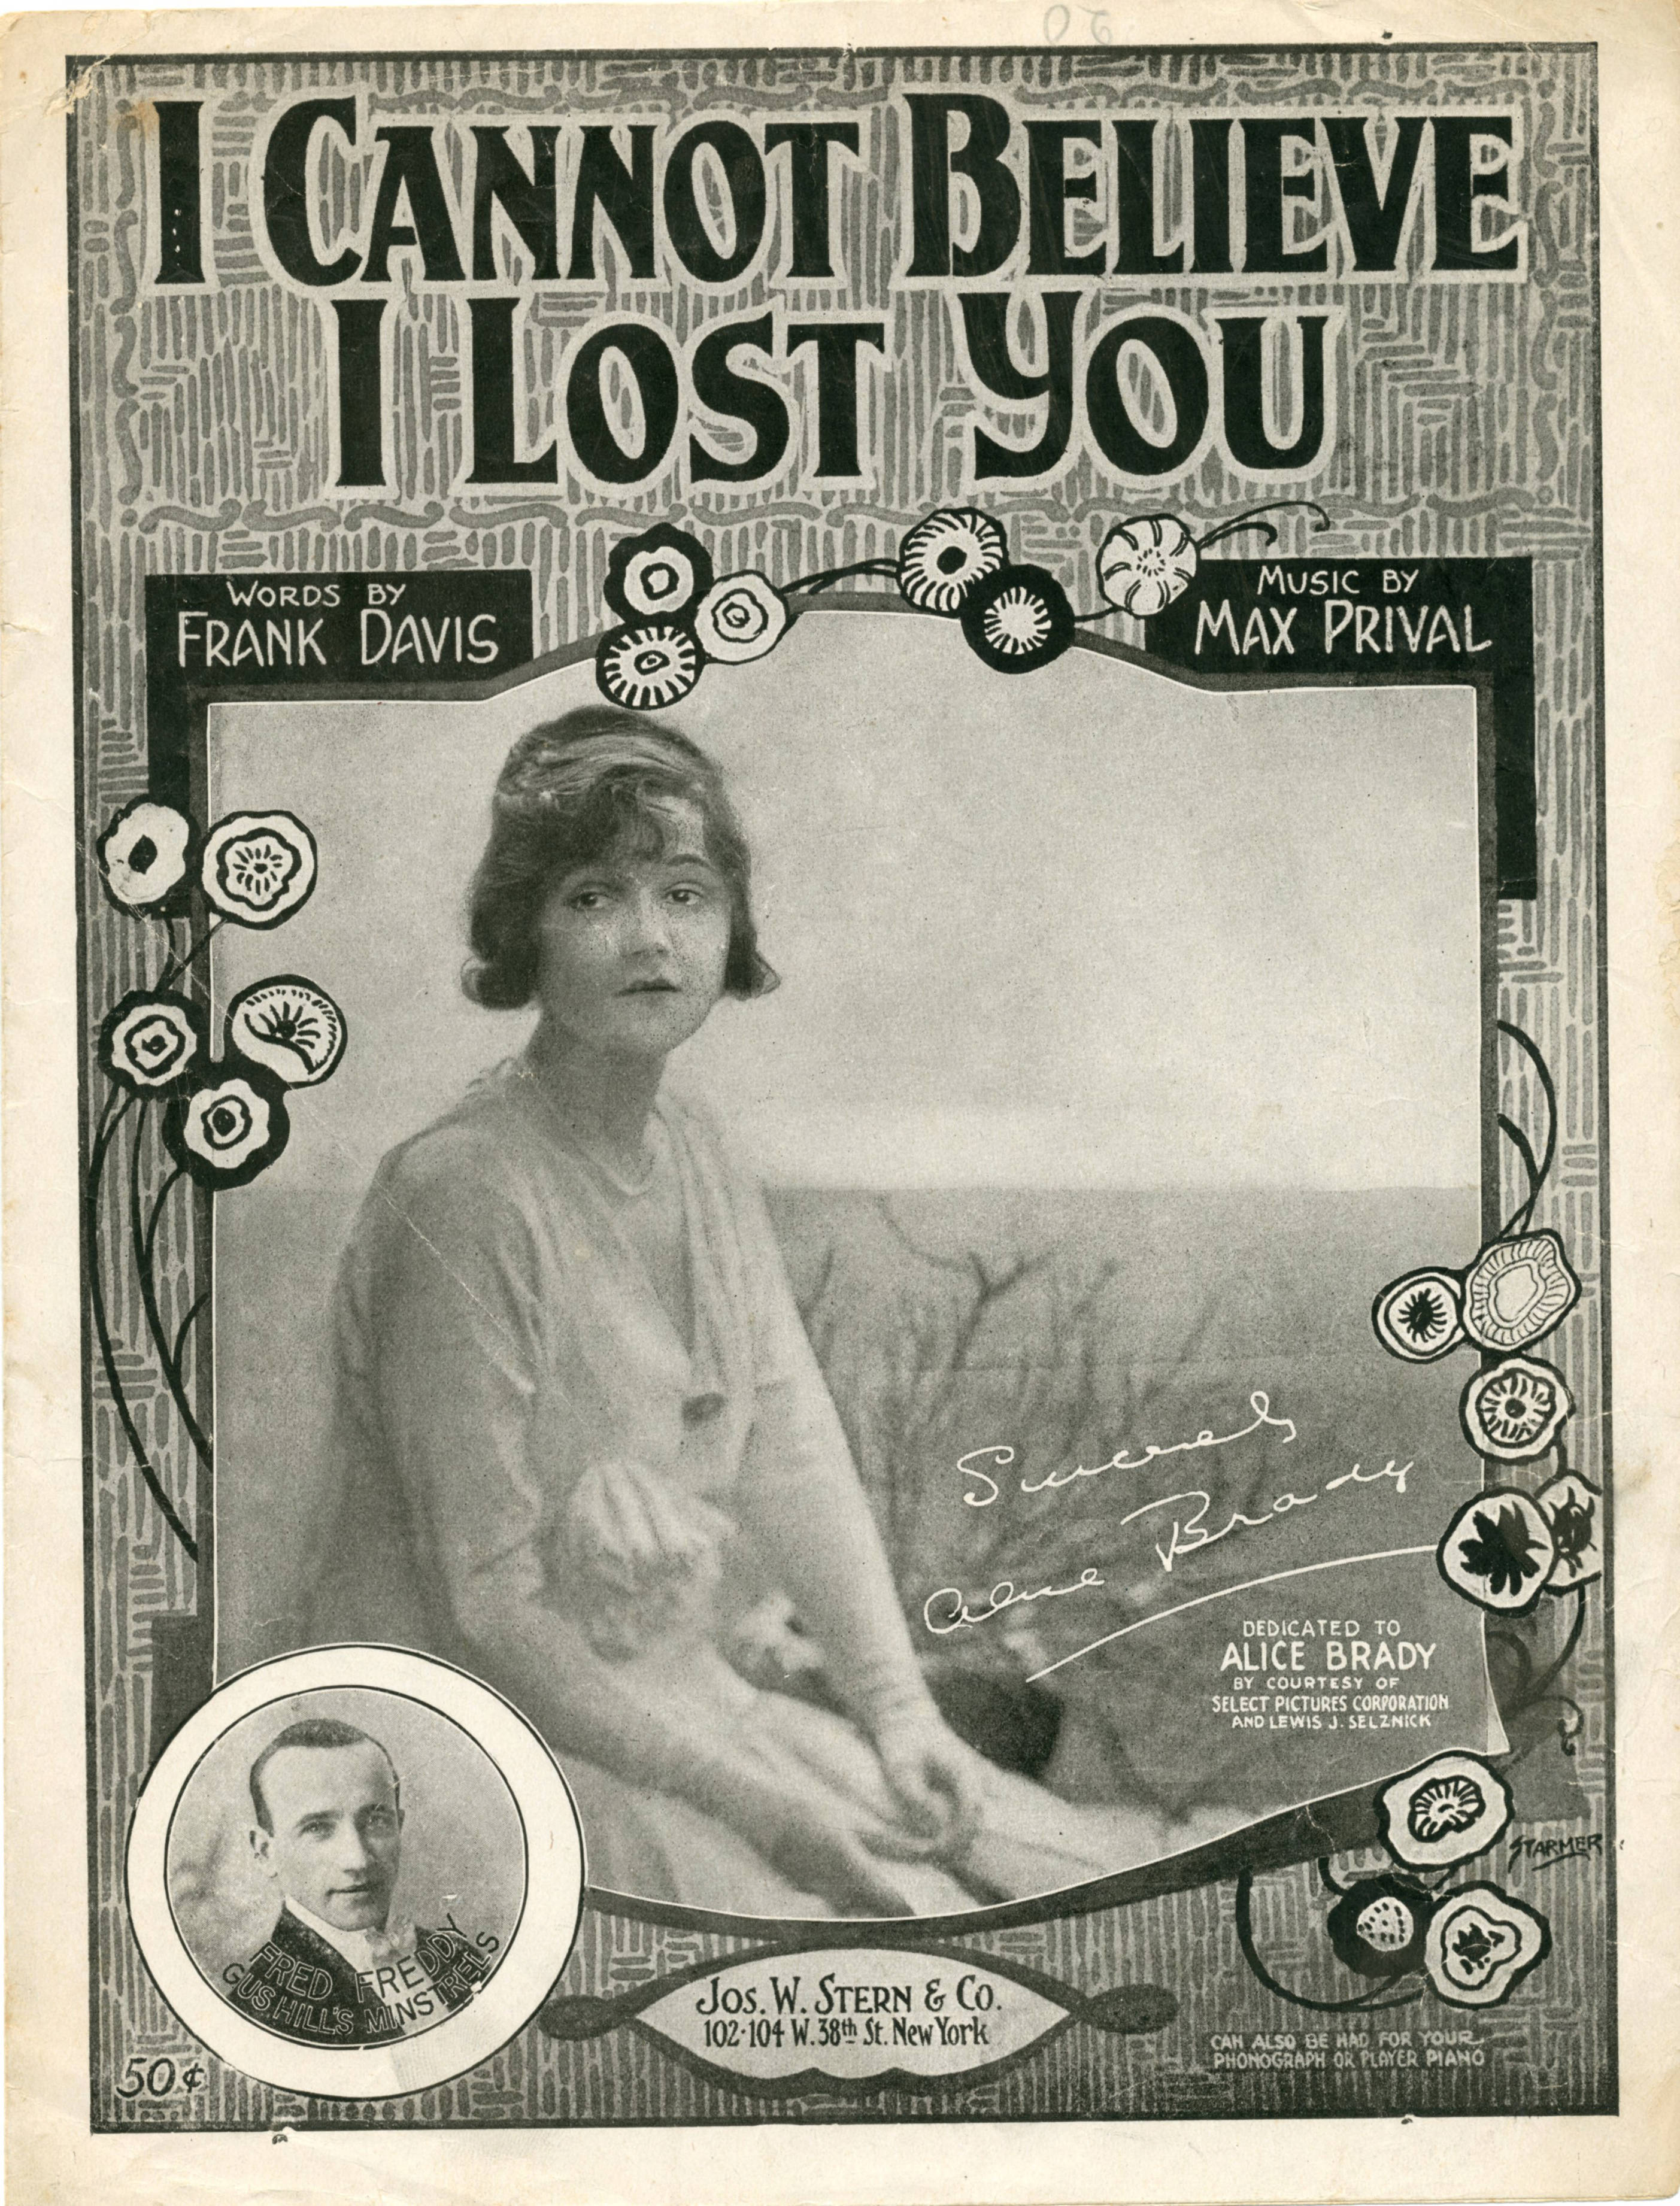 Sheet music cover - I CANNOT BELIEVE I LOST YOU (1919)